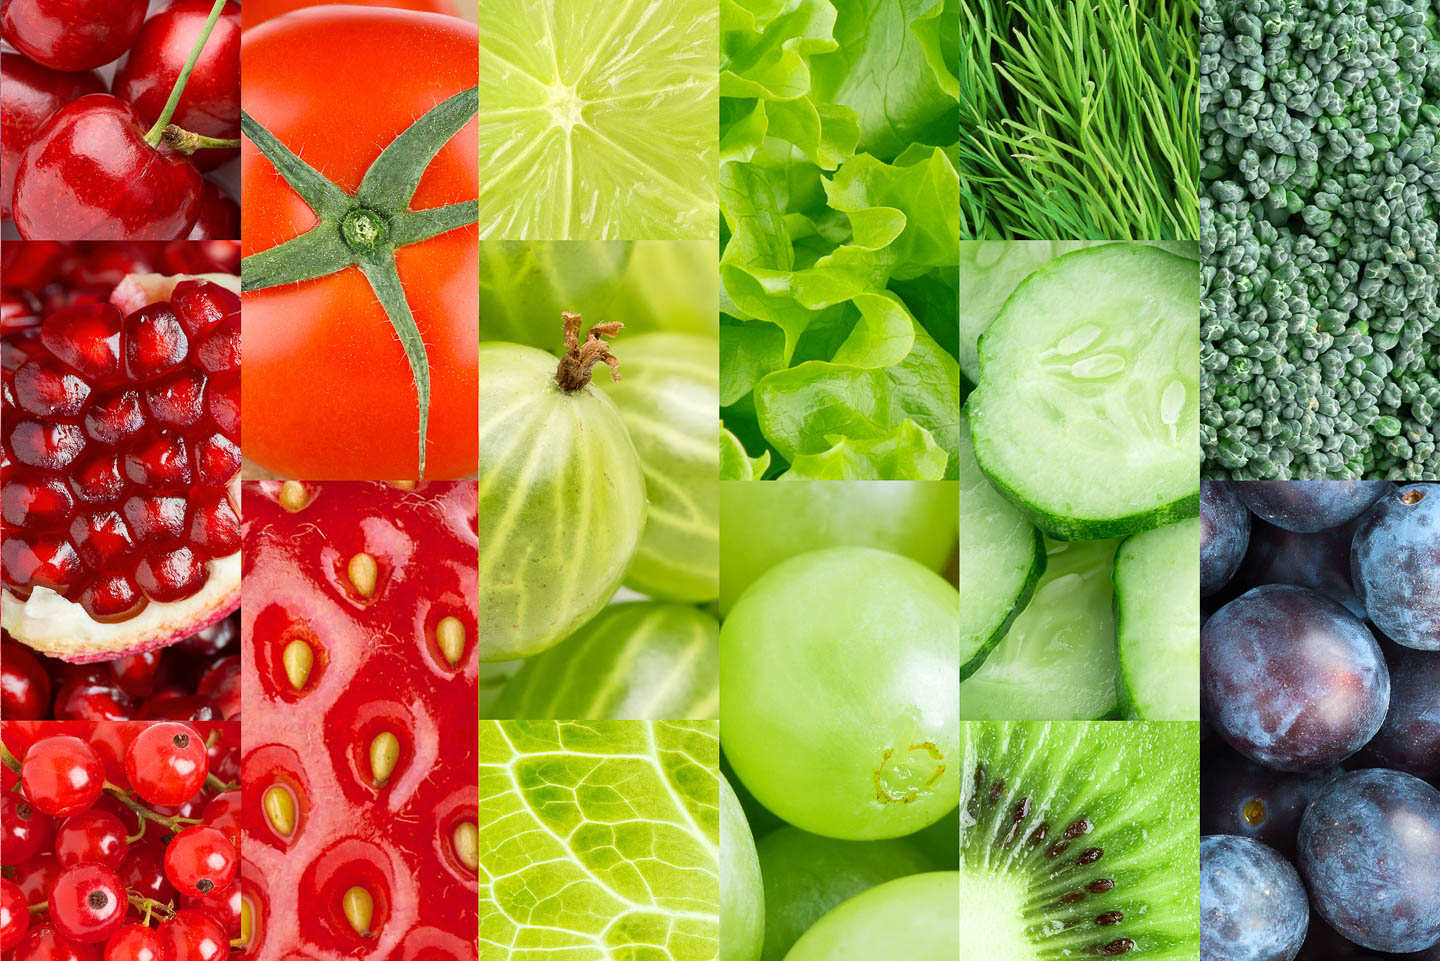 Different types of fruits and vegetables